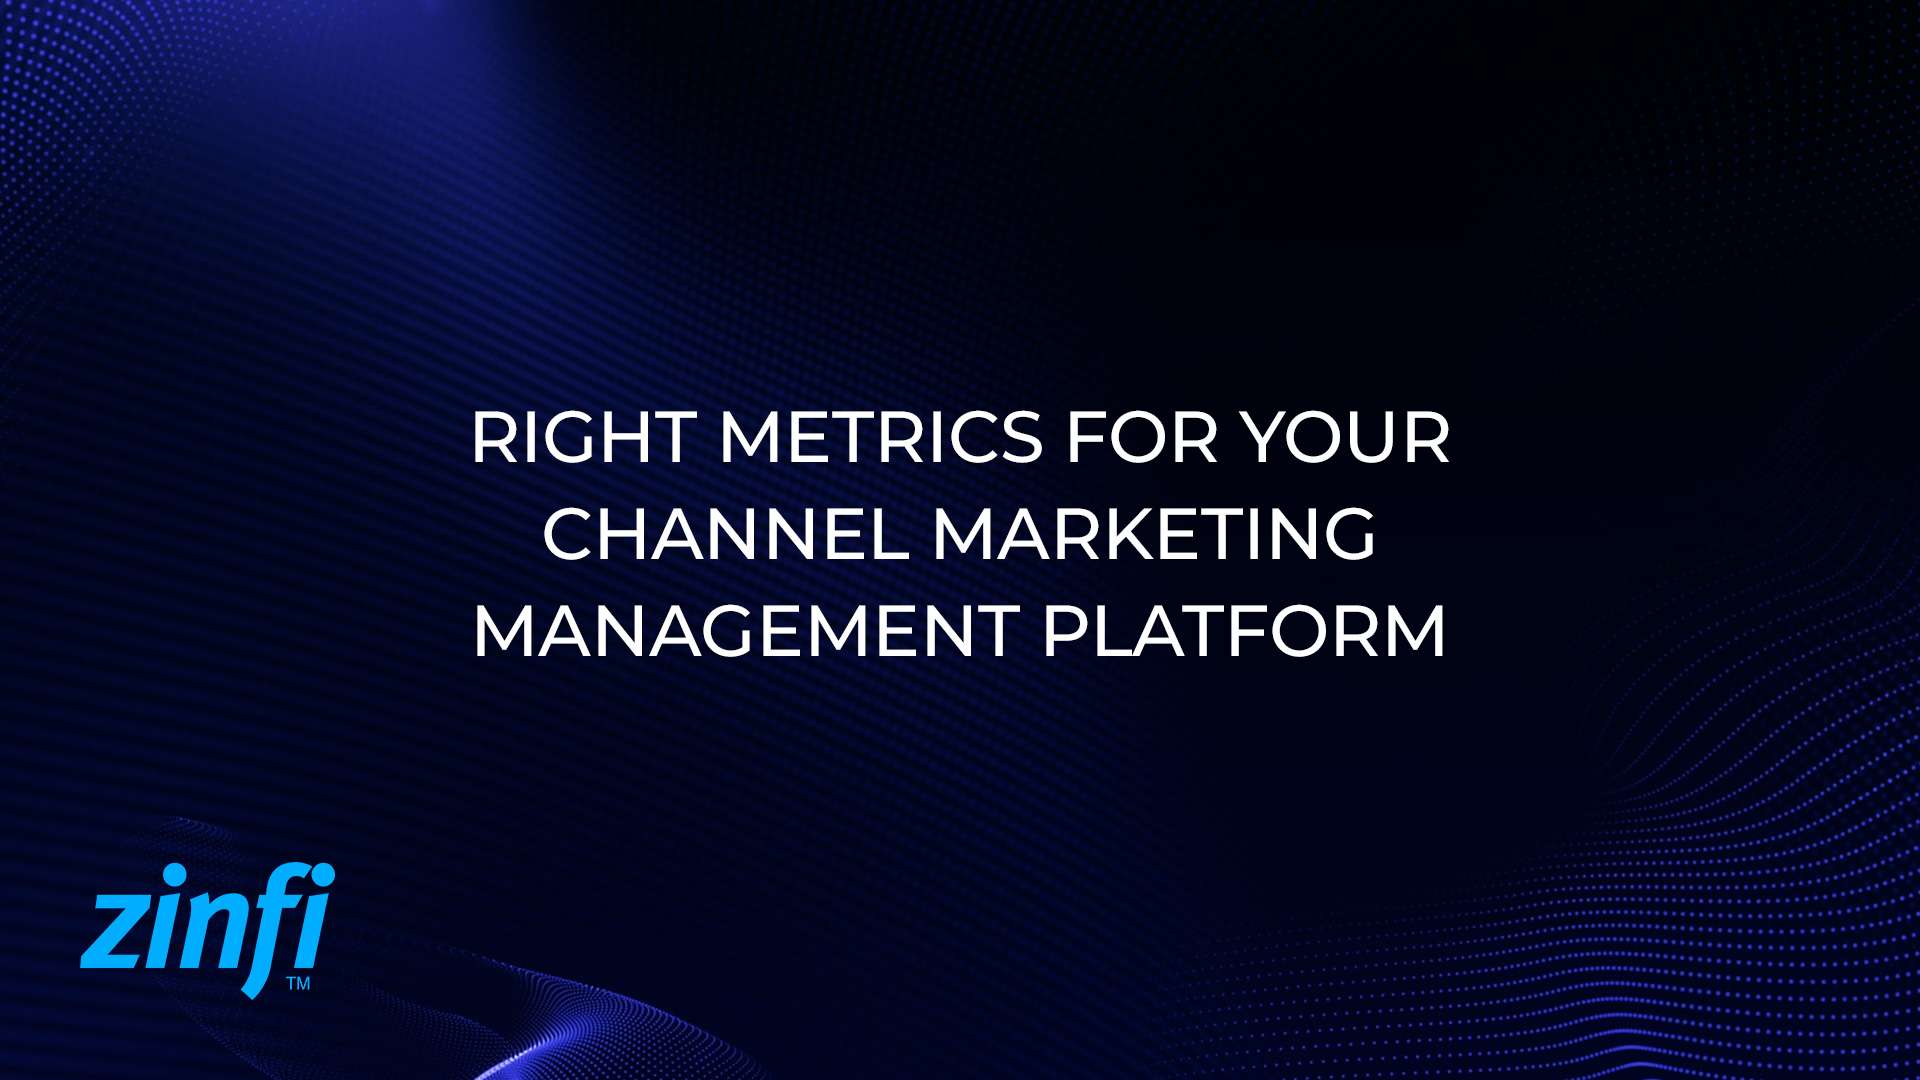 Right Metrics for Your Channel Marketing Management Platform